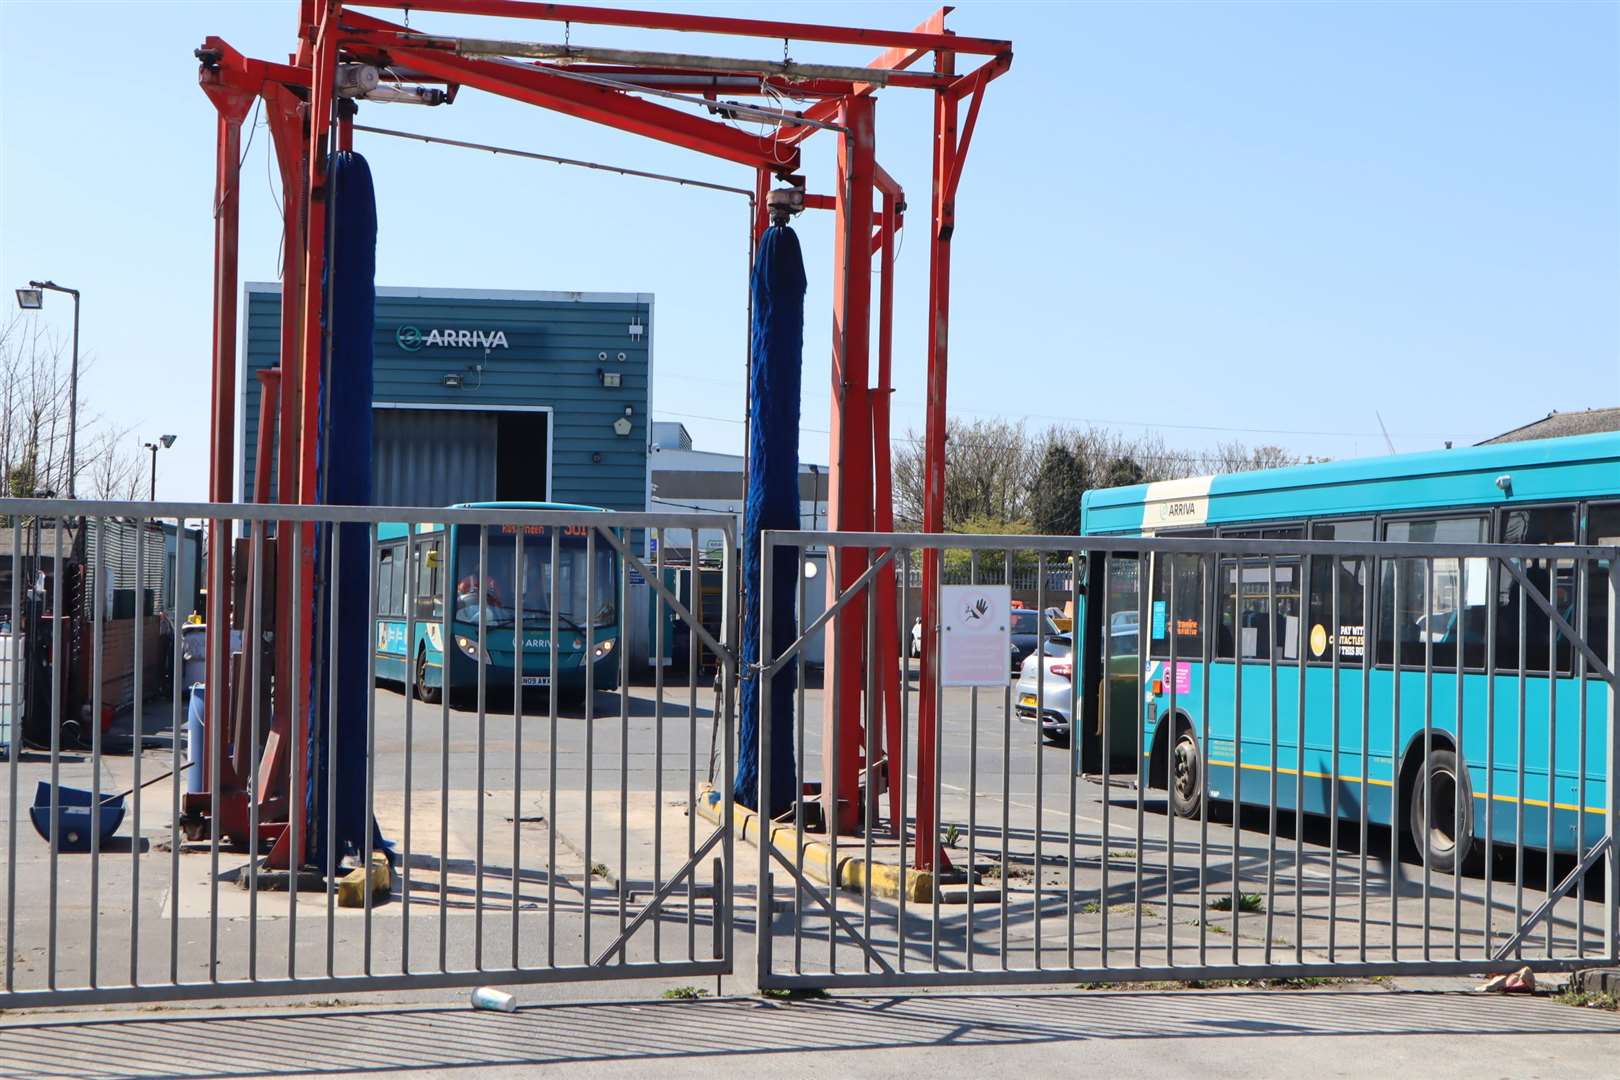 Arriva bus station in Sheerness